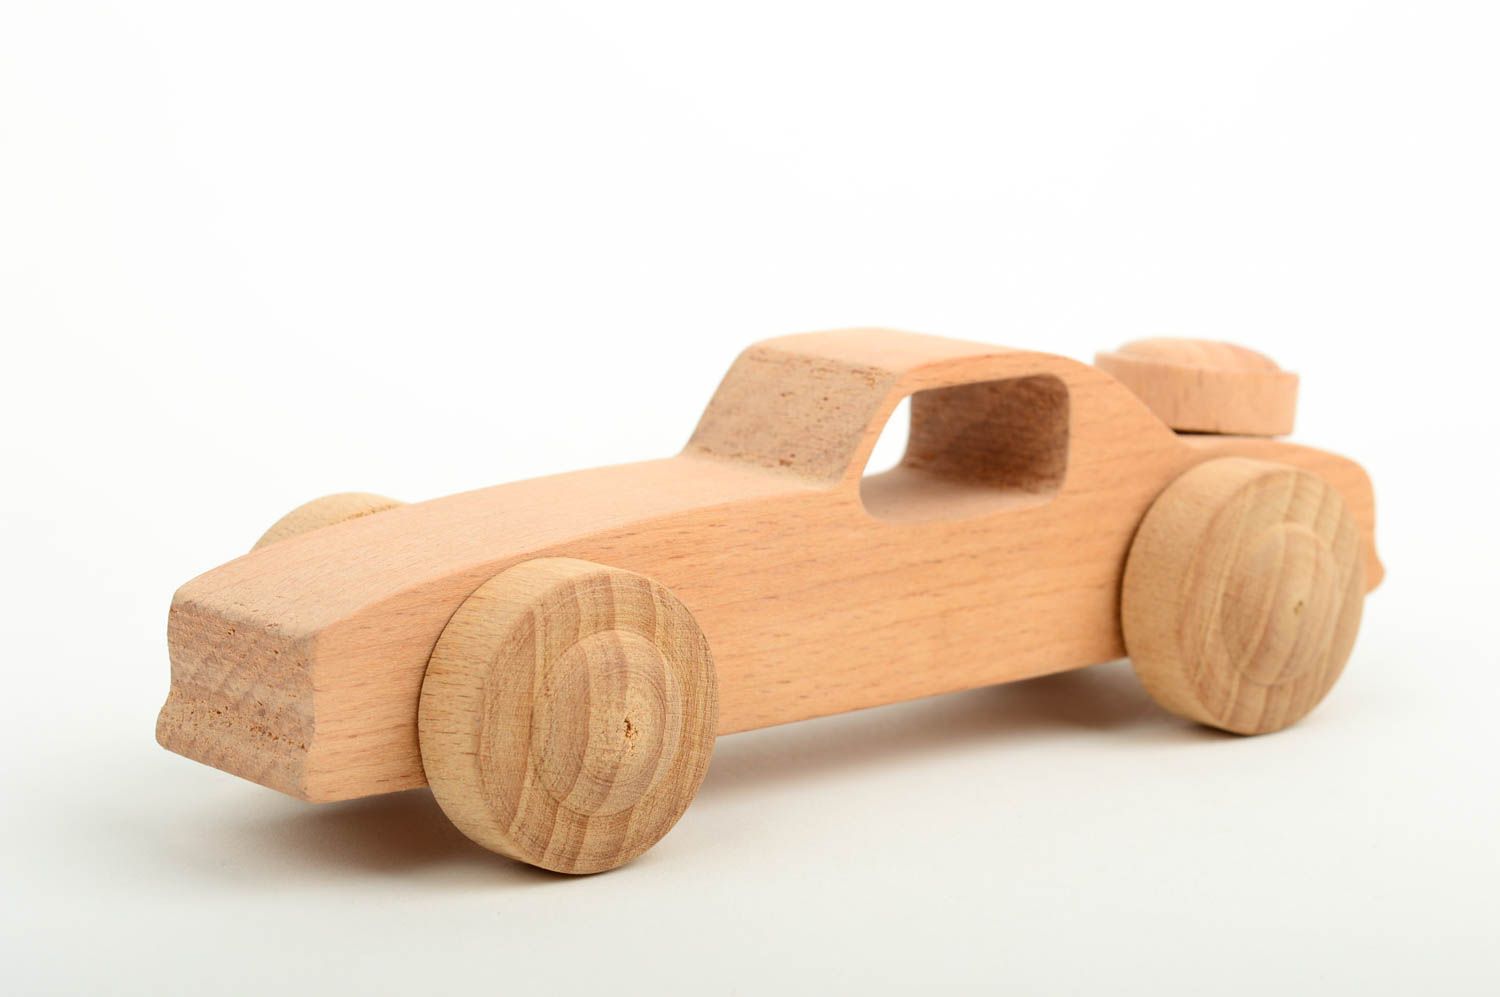 Handmade wood toy childrens wheeled toys toy car wooden gifts presents for kids photo 3